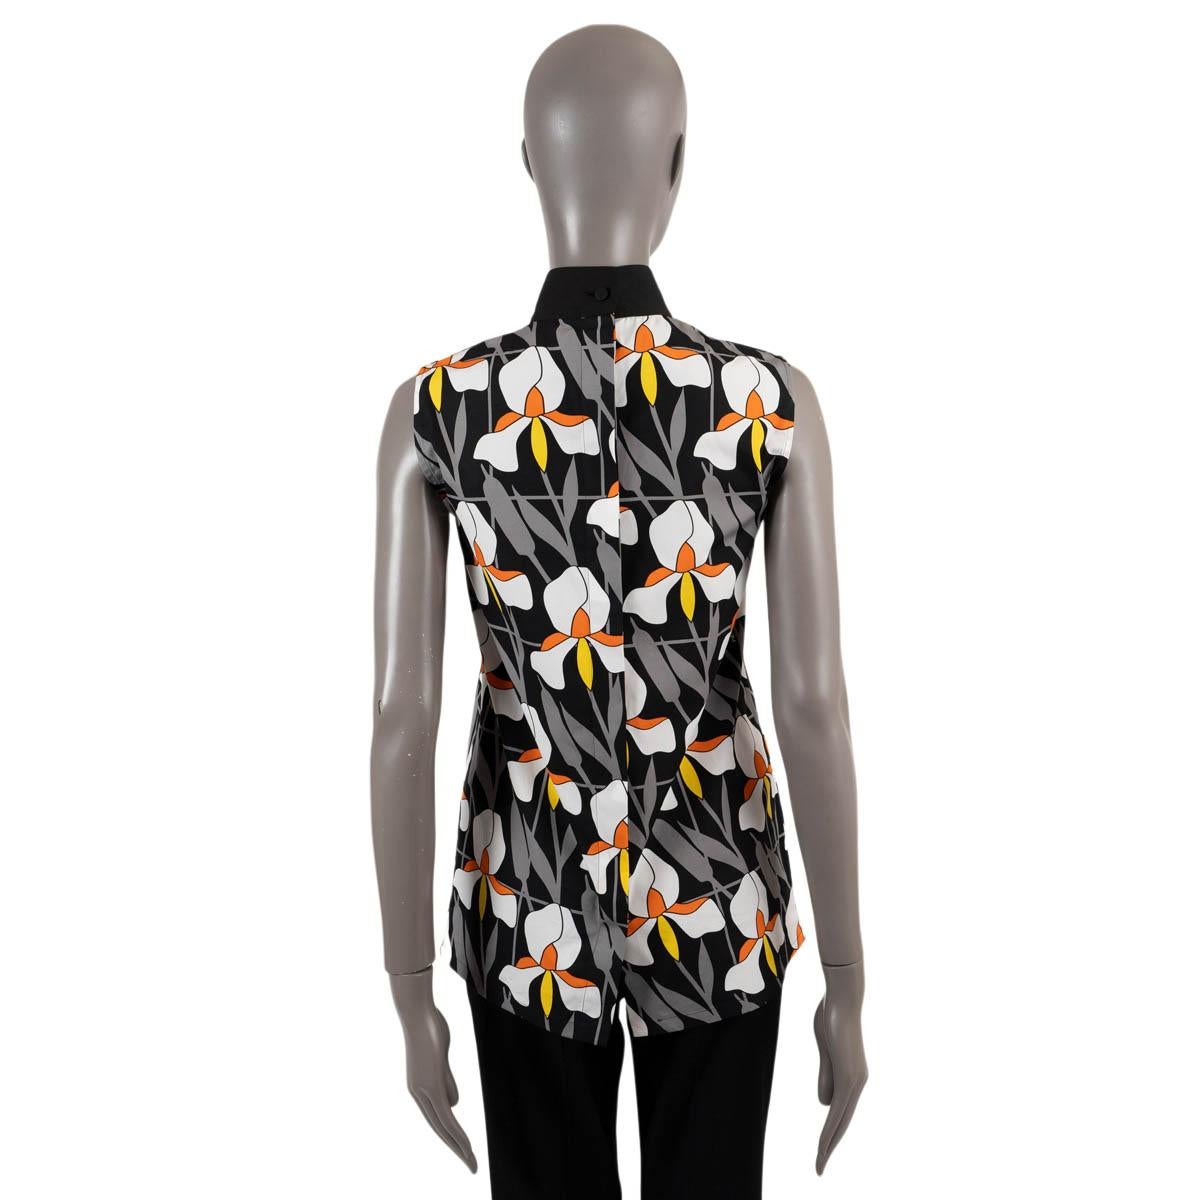 PRADA grey & black cotton 2020 FLORAL SLEEVELESS Blouse Shirt 38 XS In Excellent Condition For Sale In Zürich, CH